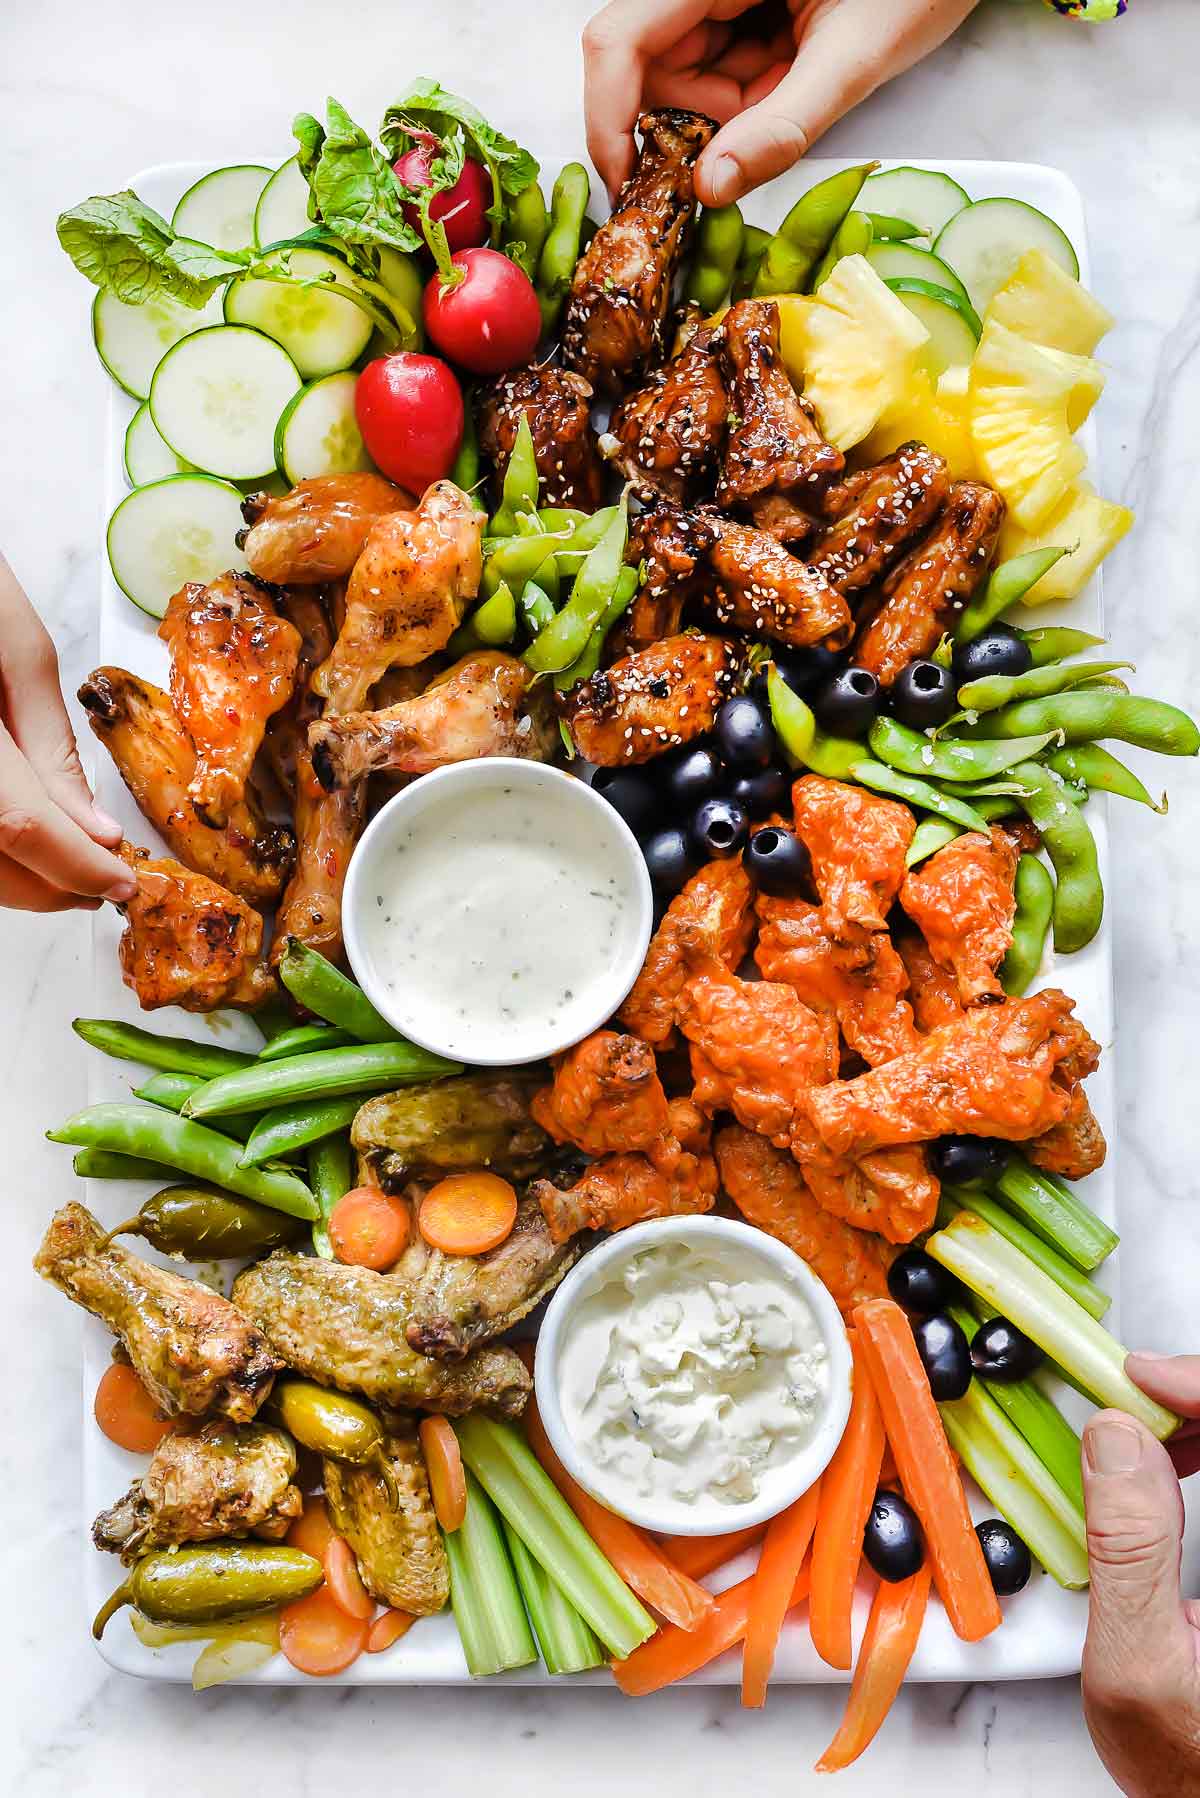 Oven Baked Chicken Wings 4 Wing Sauce Recipes Foodiecrush Com